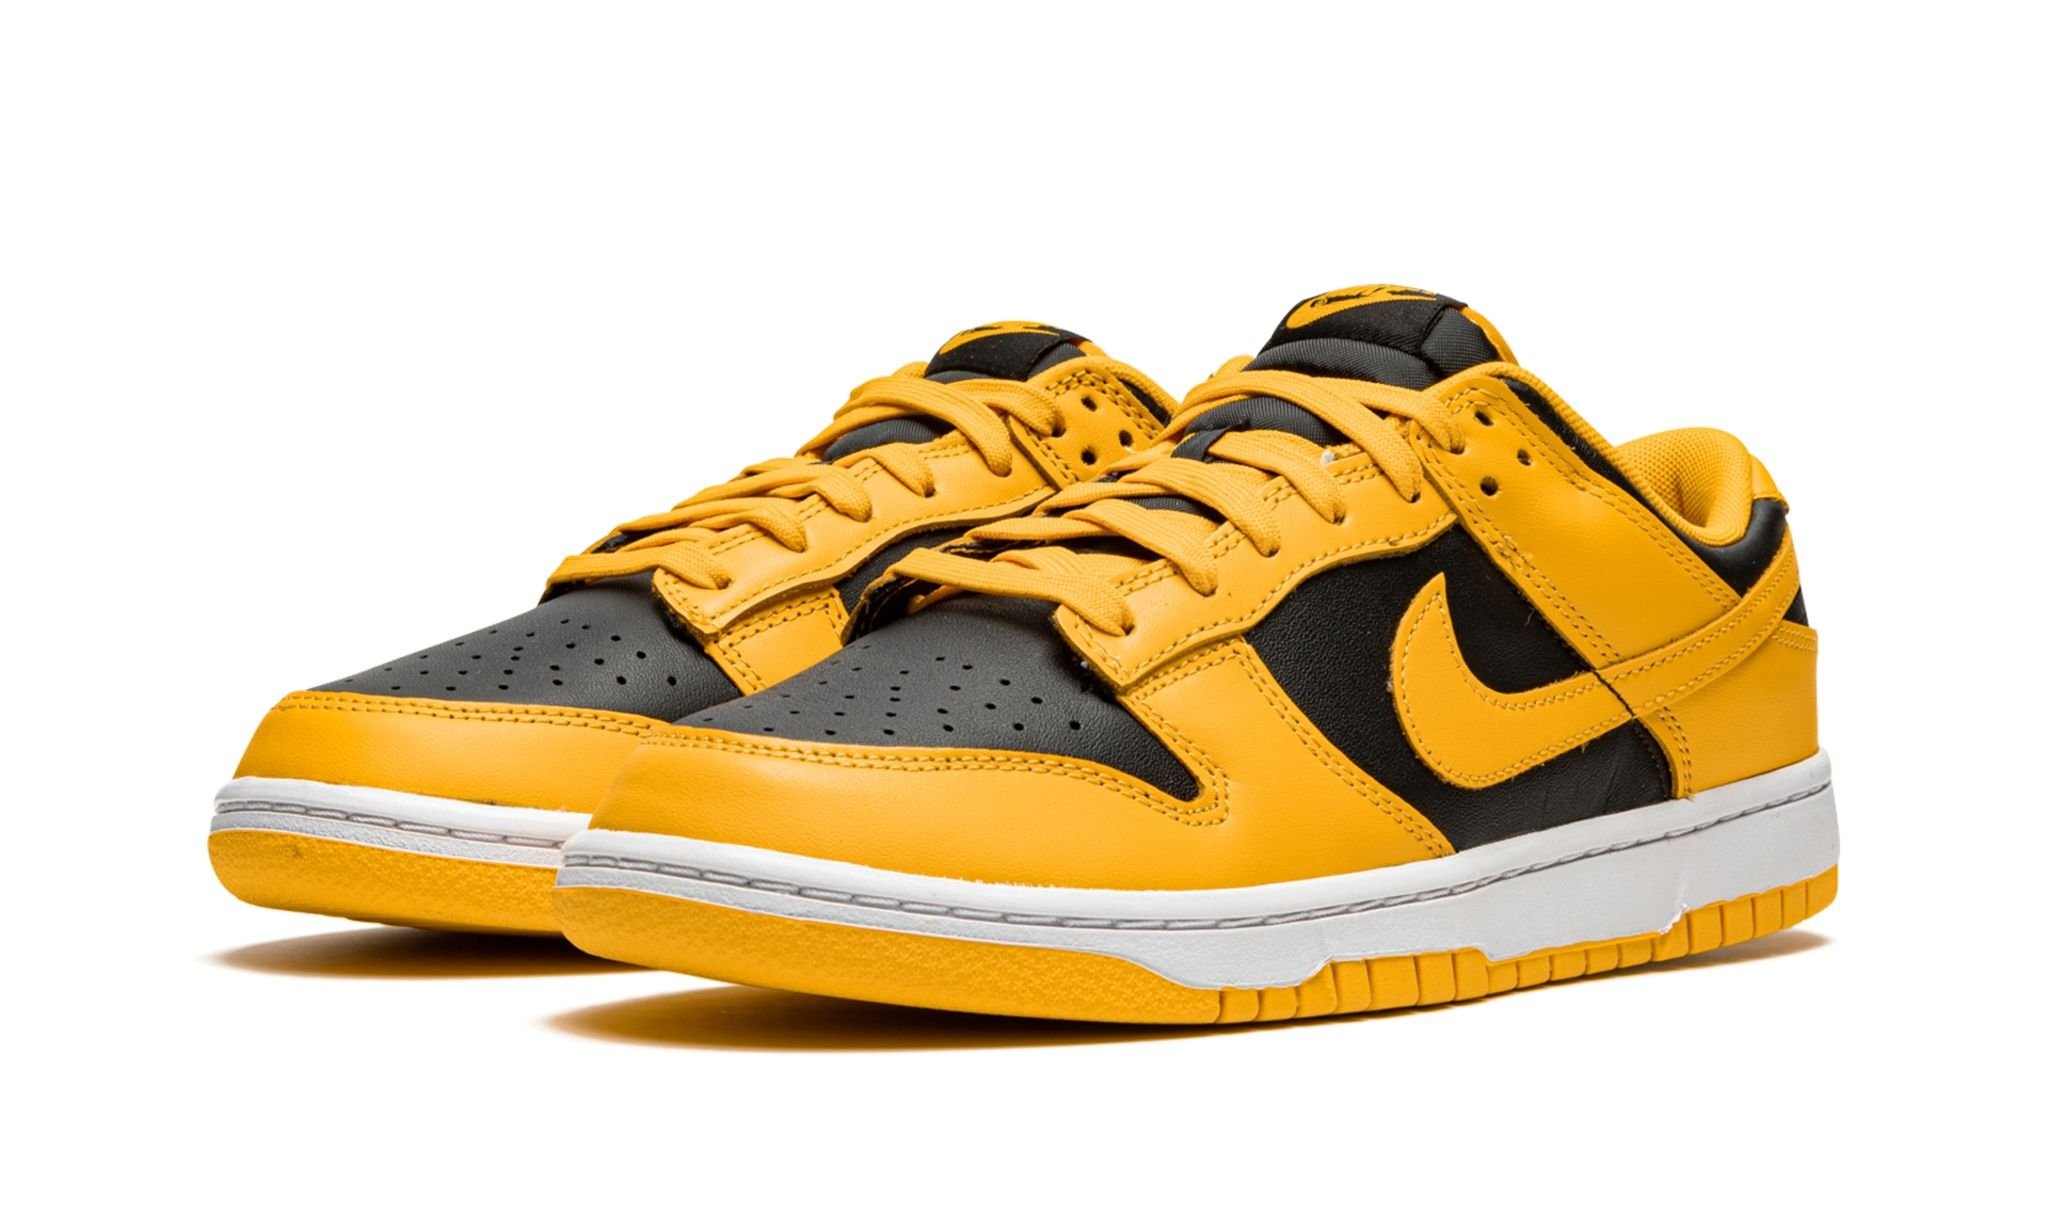 Dunk Low "Goldenrod" - 2